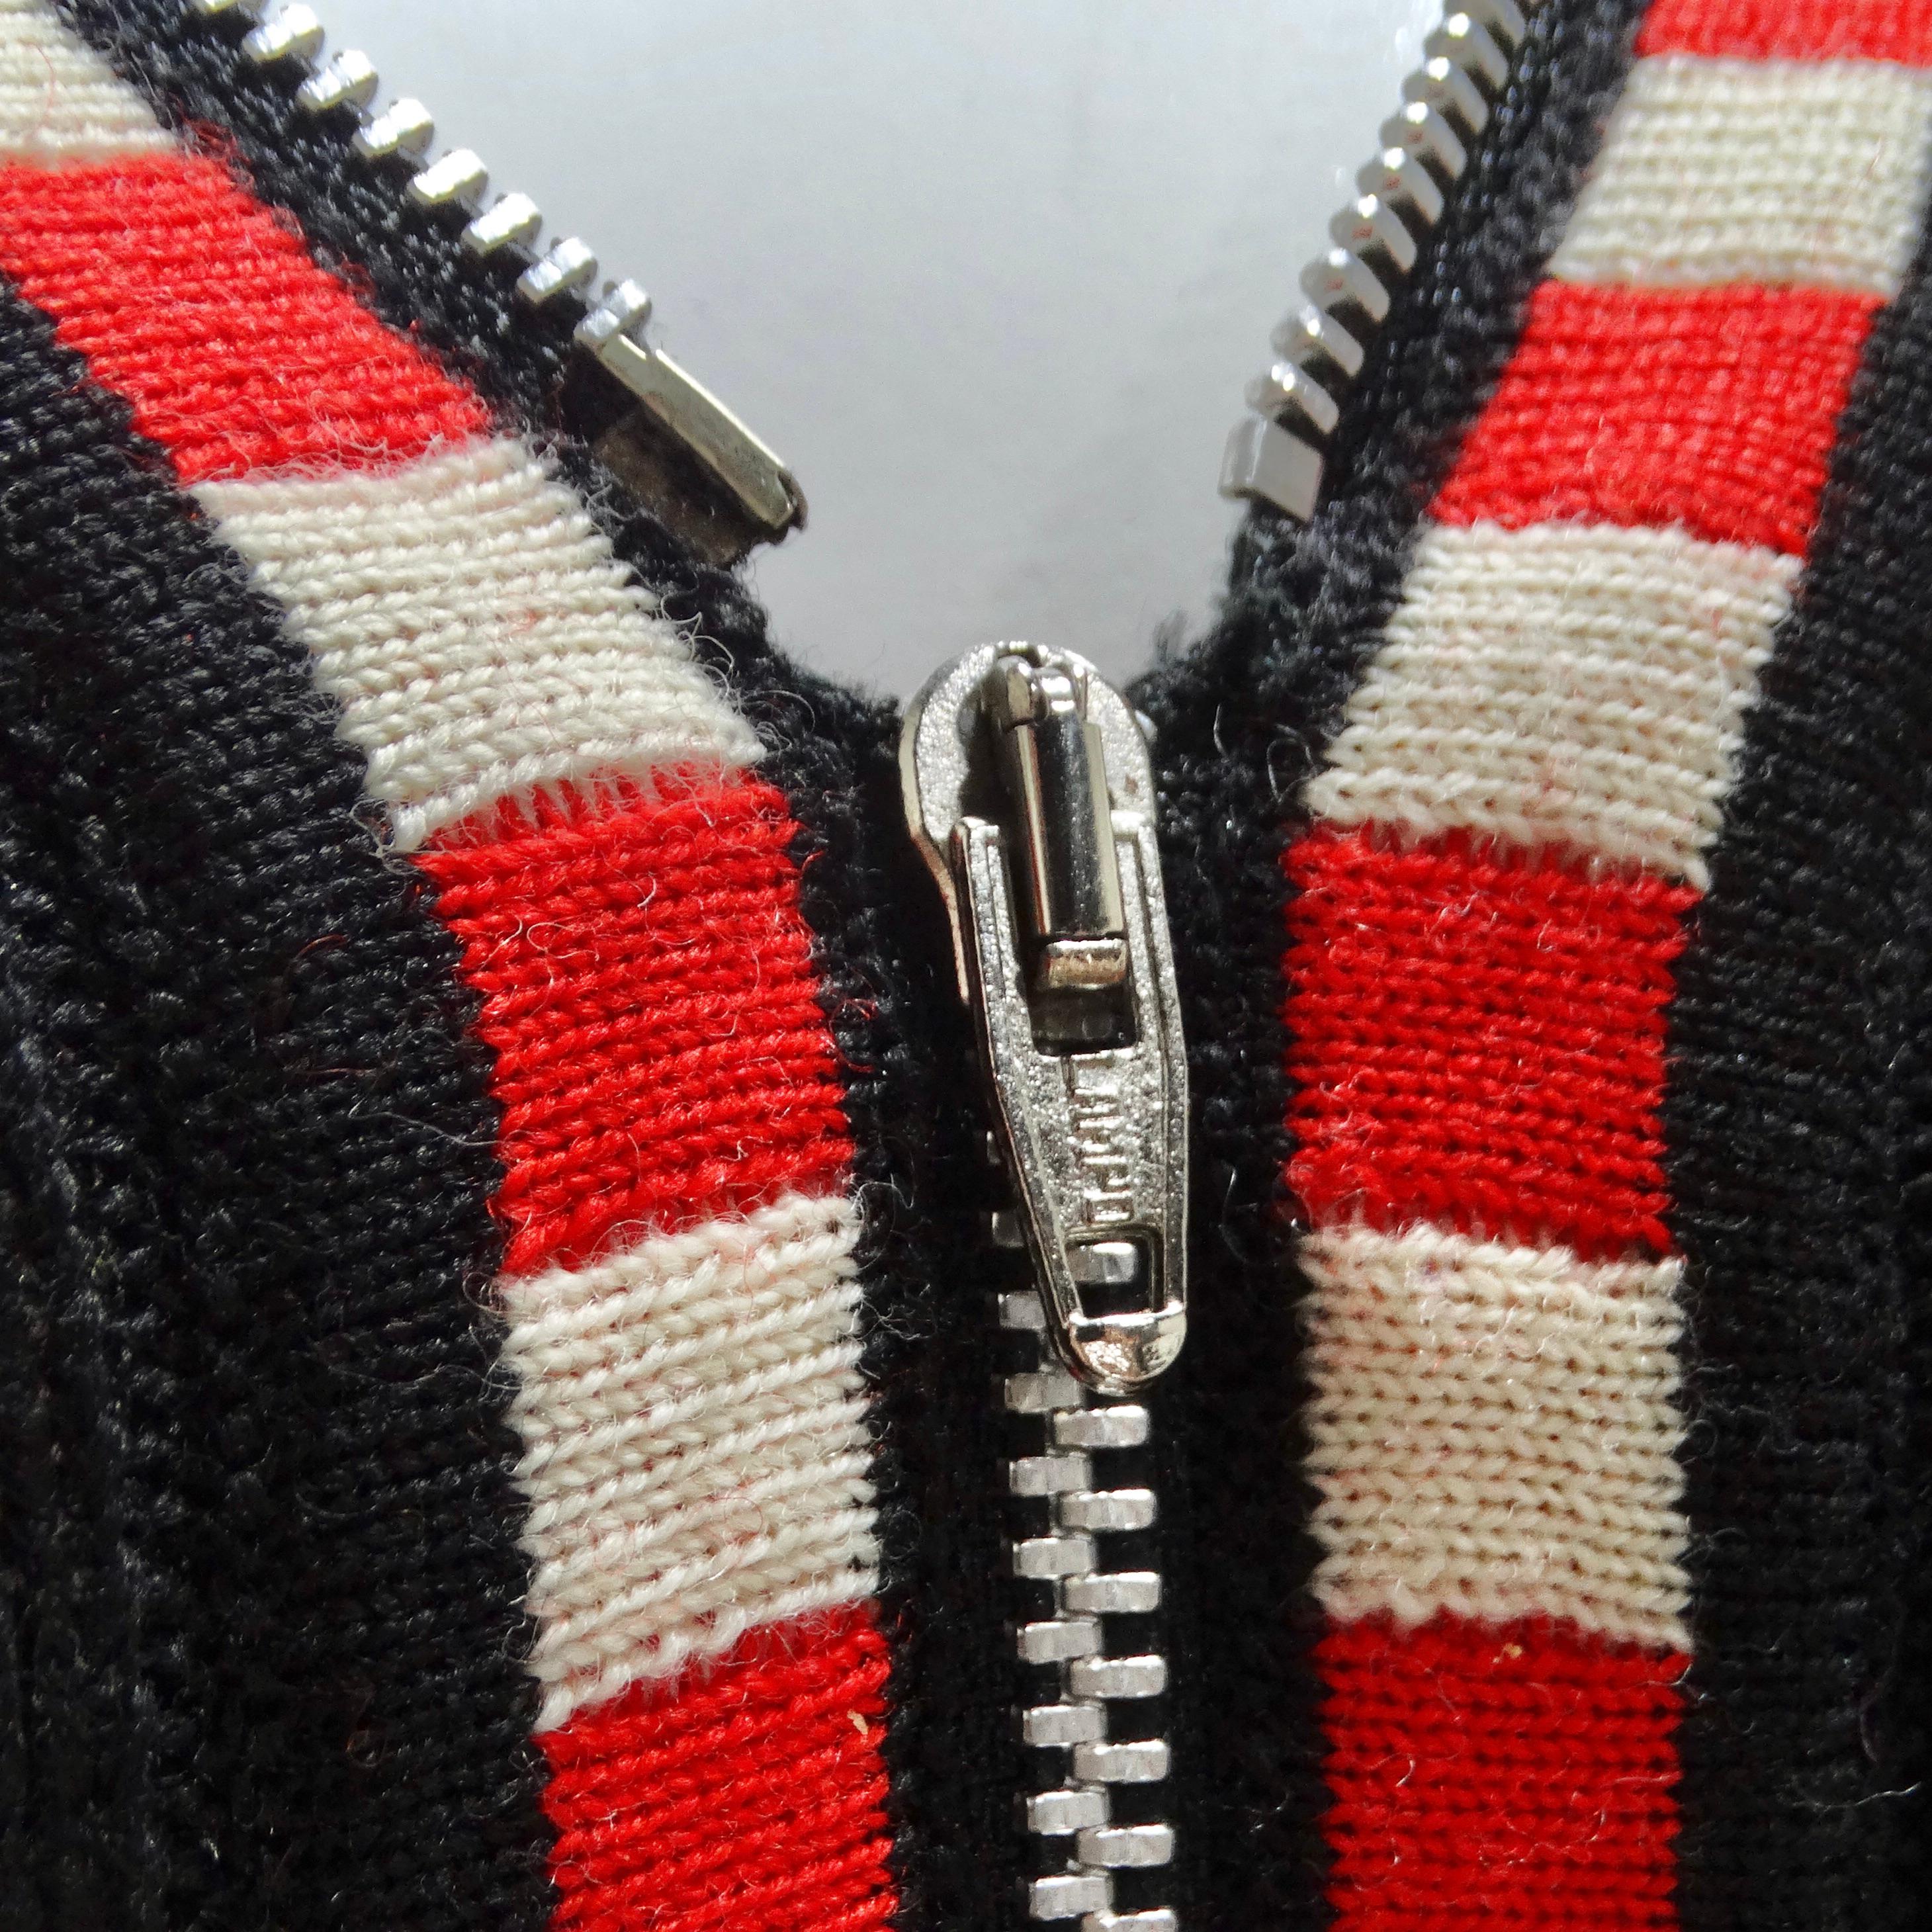 Jean Paul Gaultier Rib Knit Zip-Up Sweater In Good Condition For Sale In Scottsdale, AZ